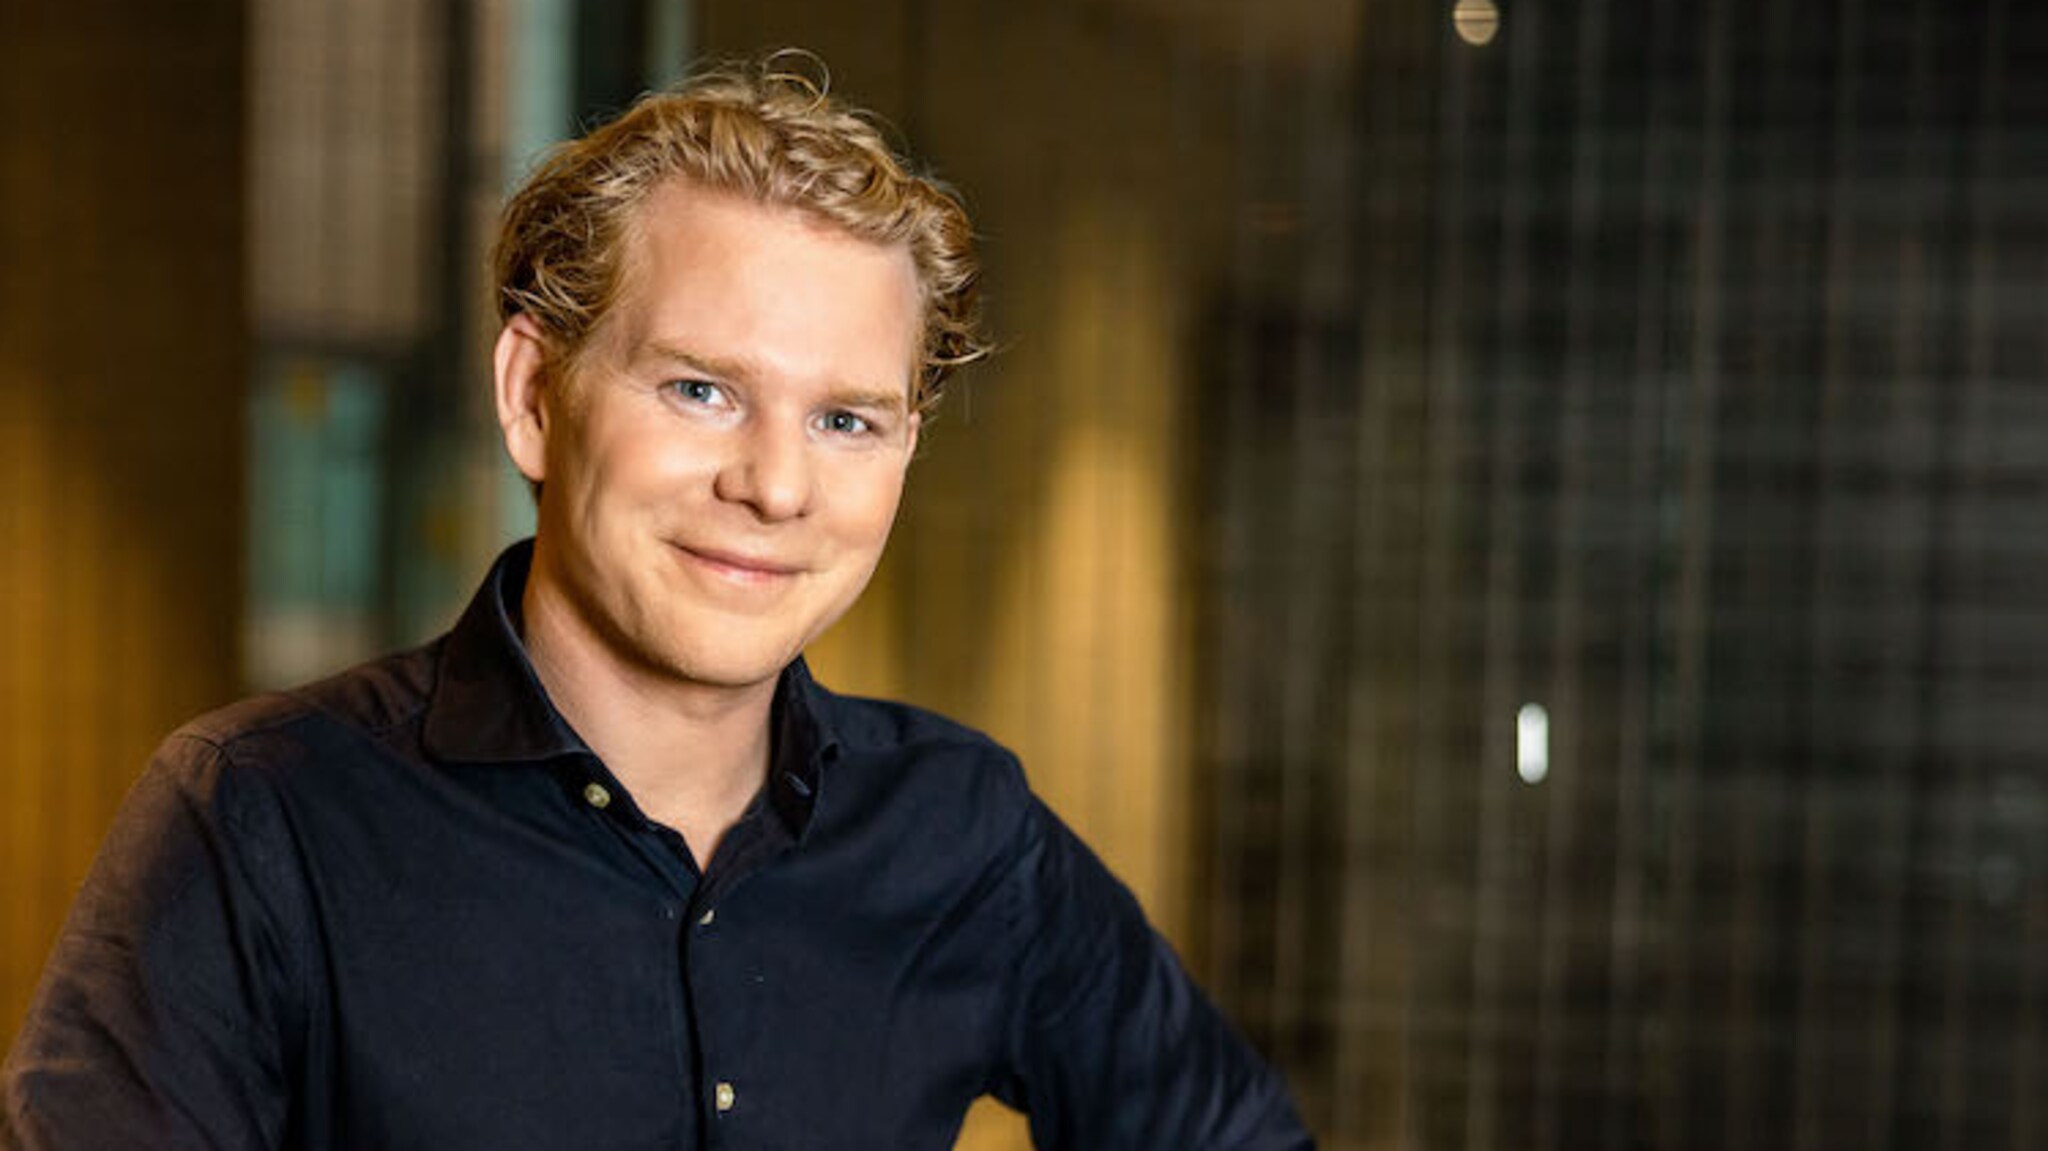 Poller Gijs Rademaker switches to RTL